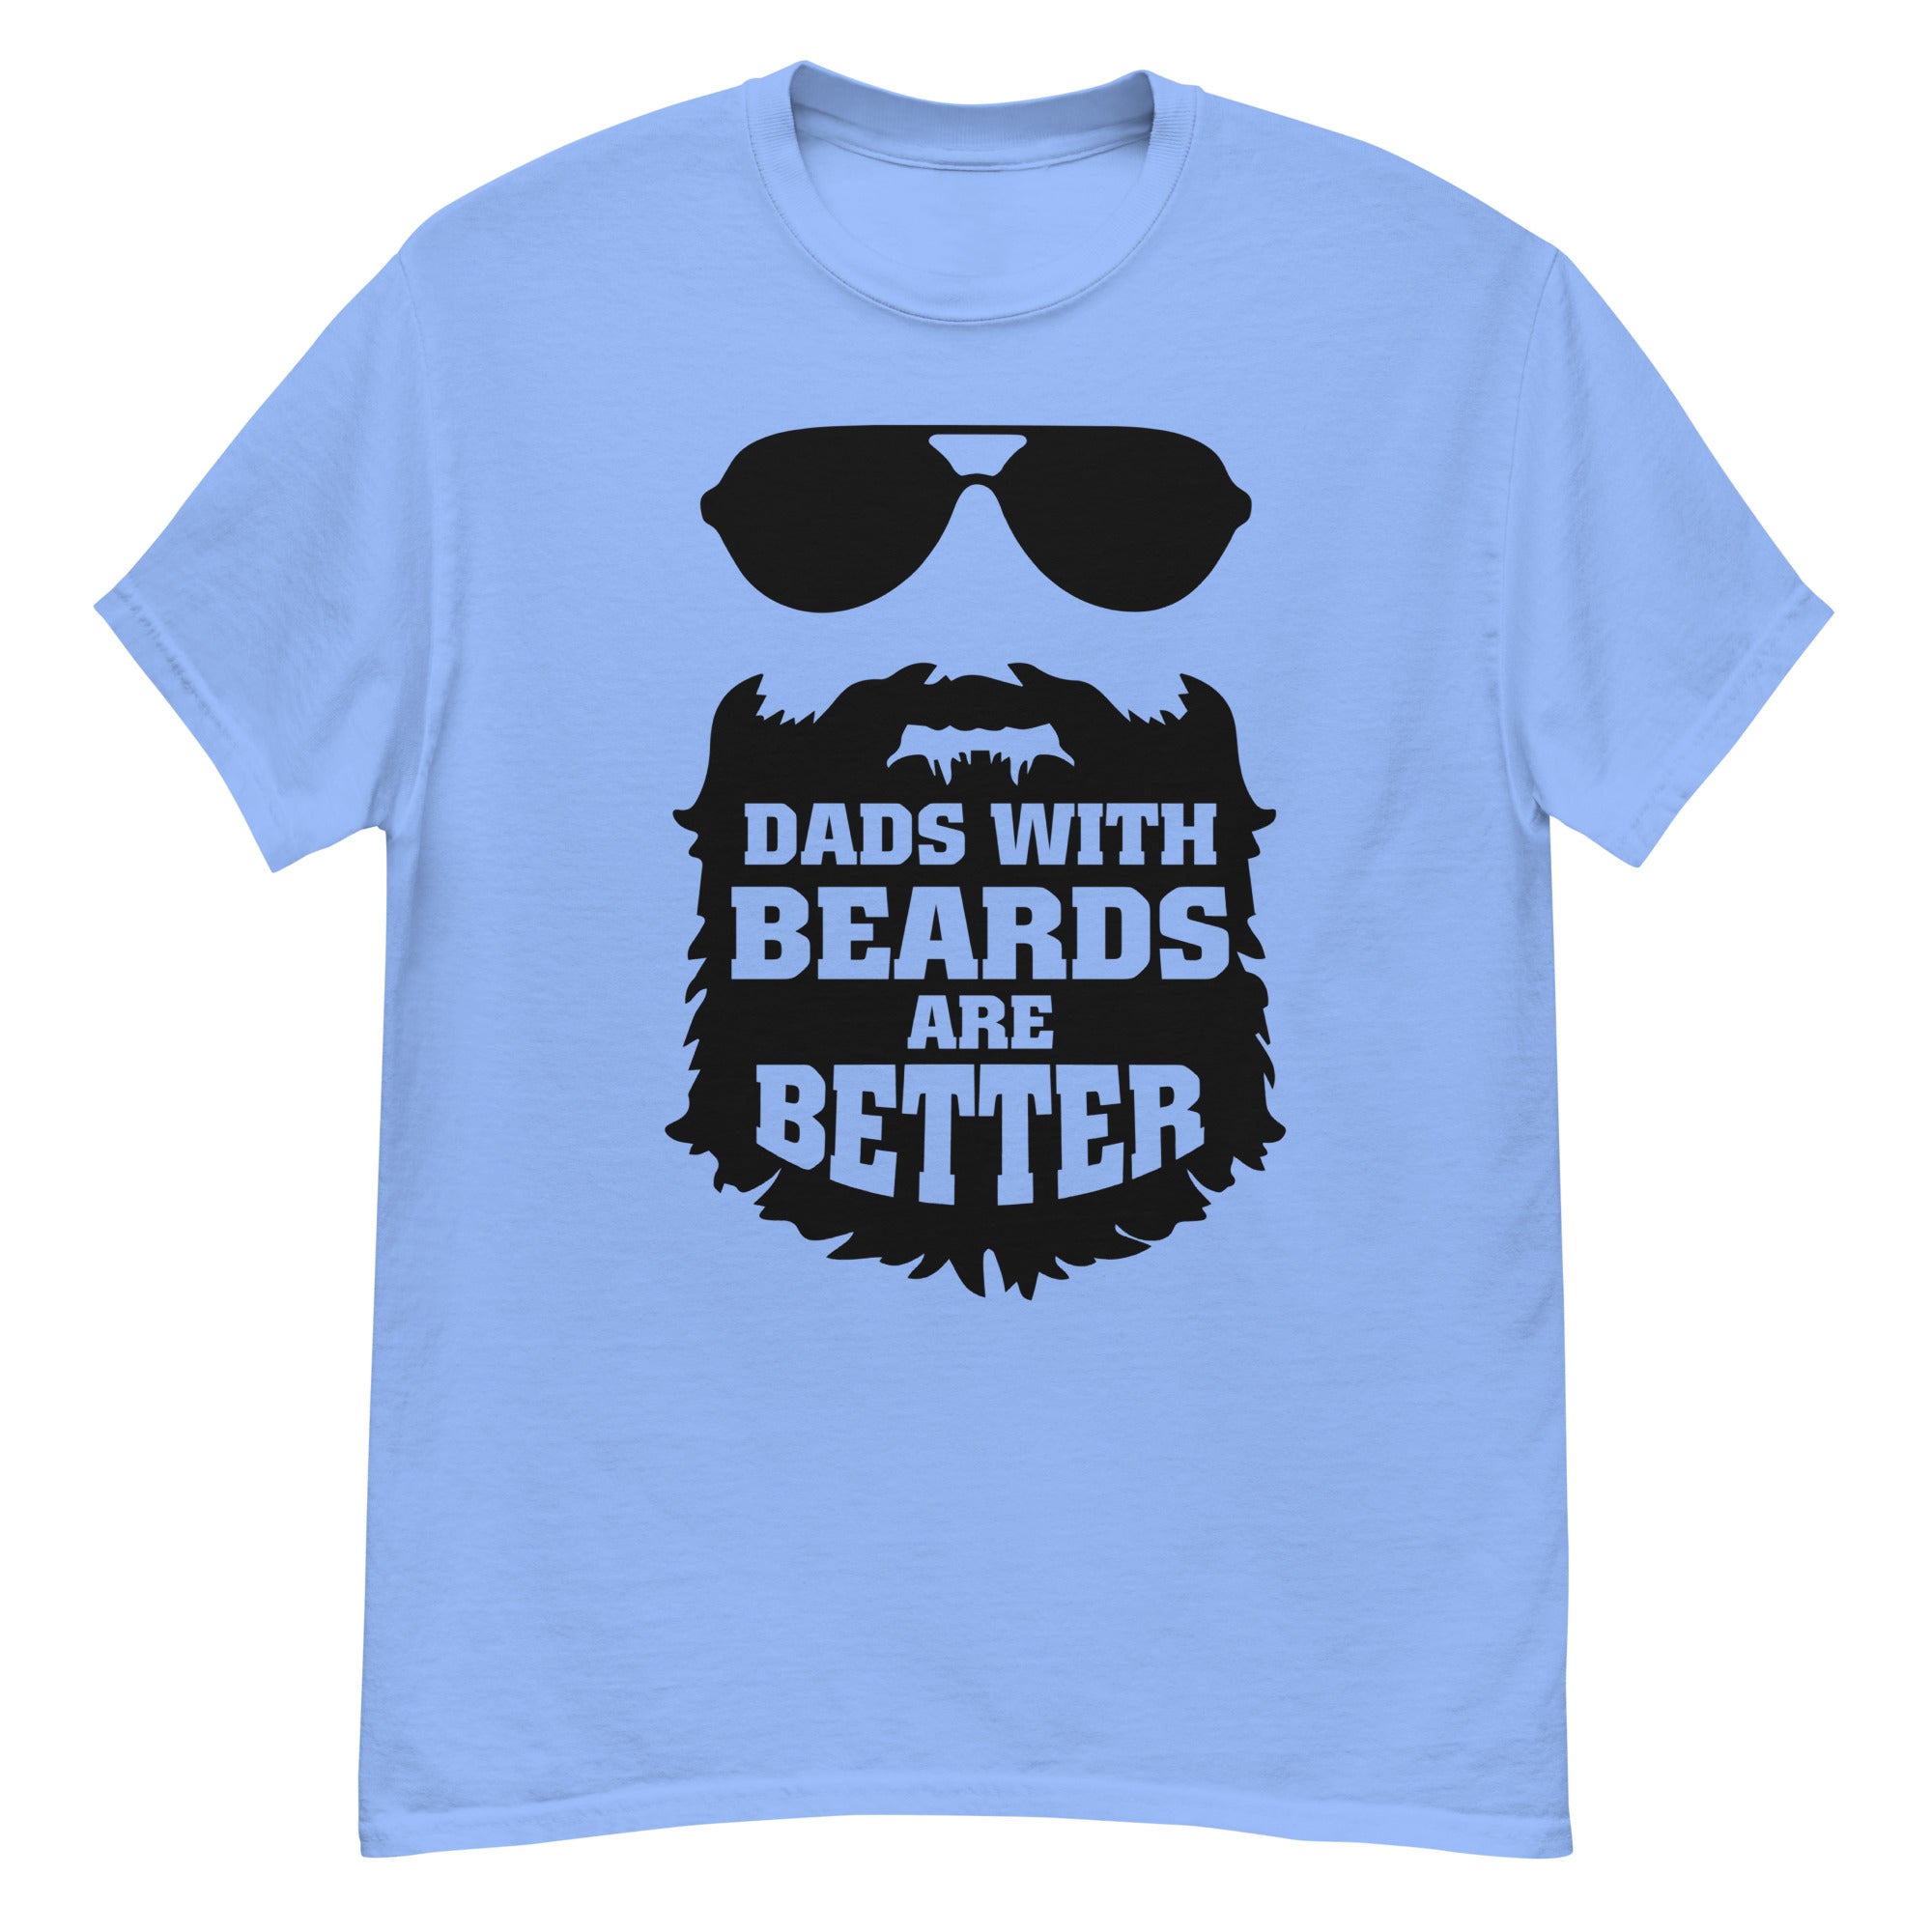 Dad's With Beards Are Better - Men's classic tee